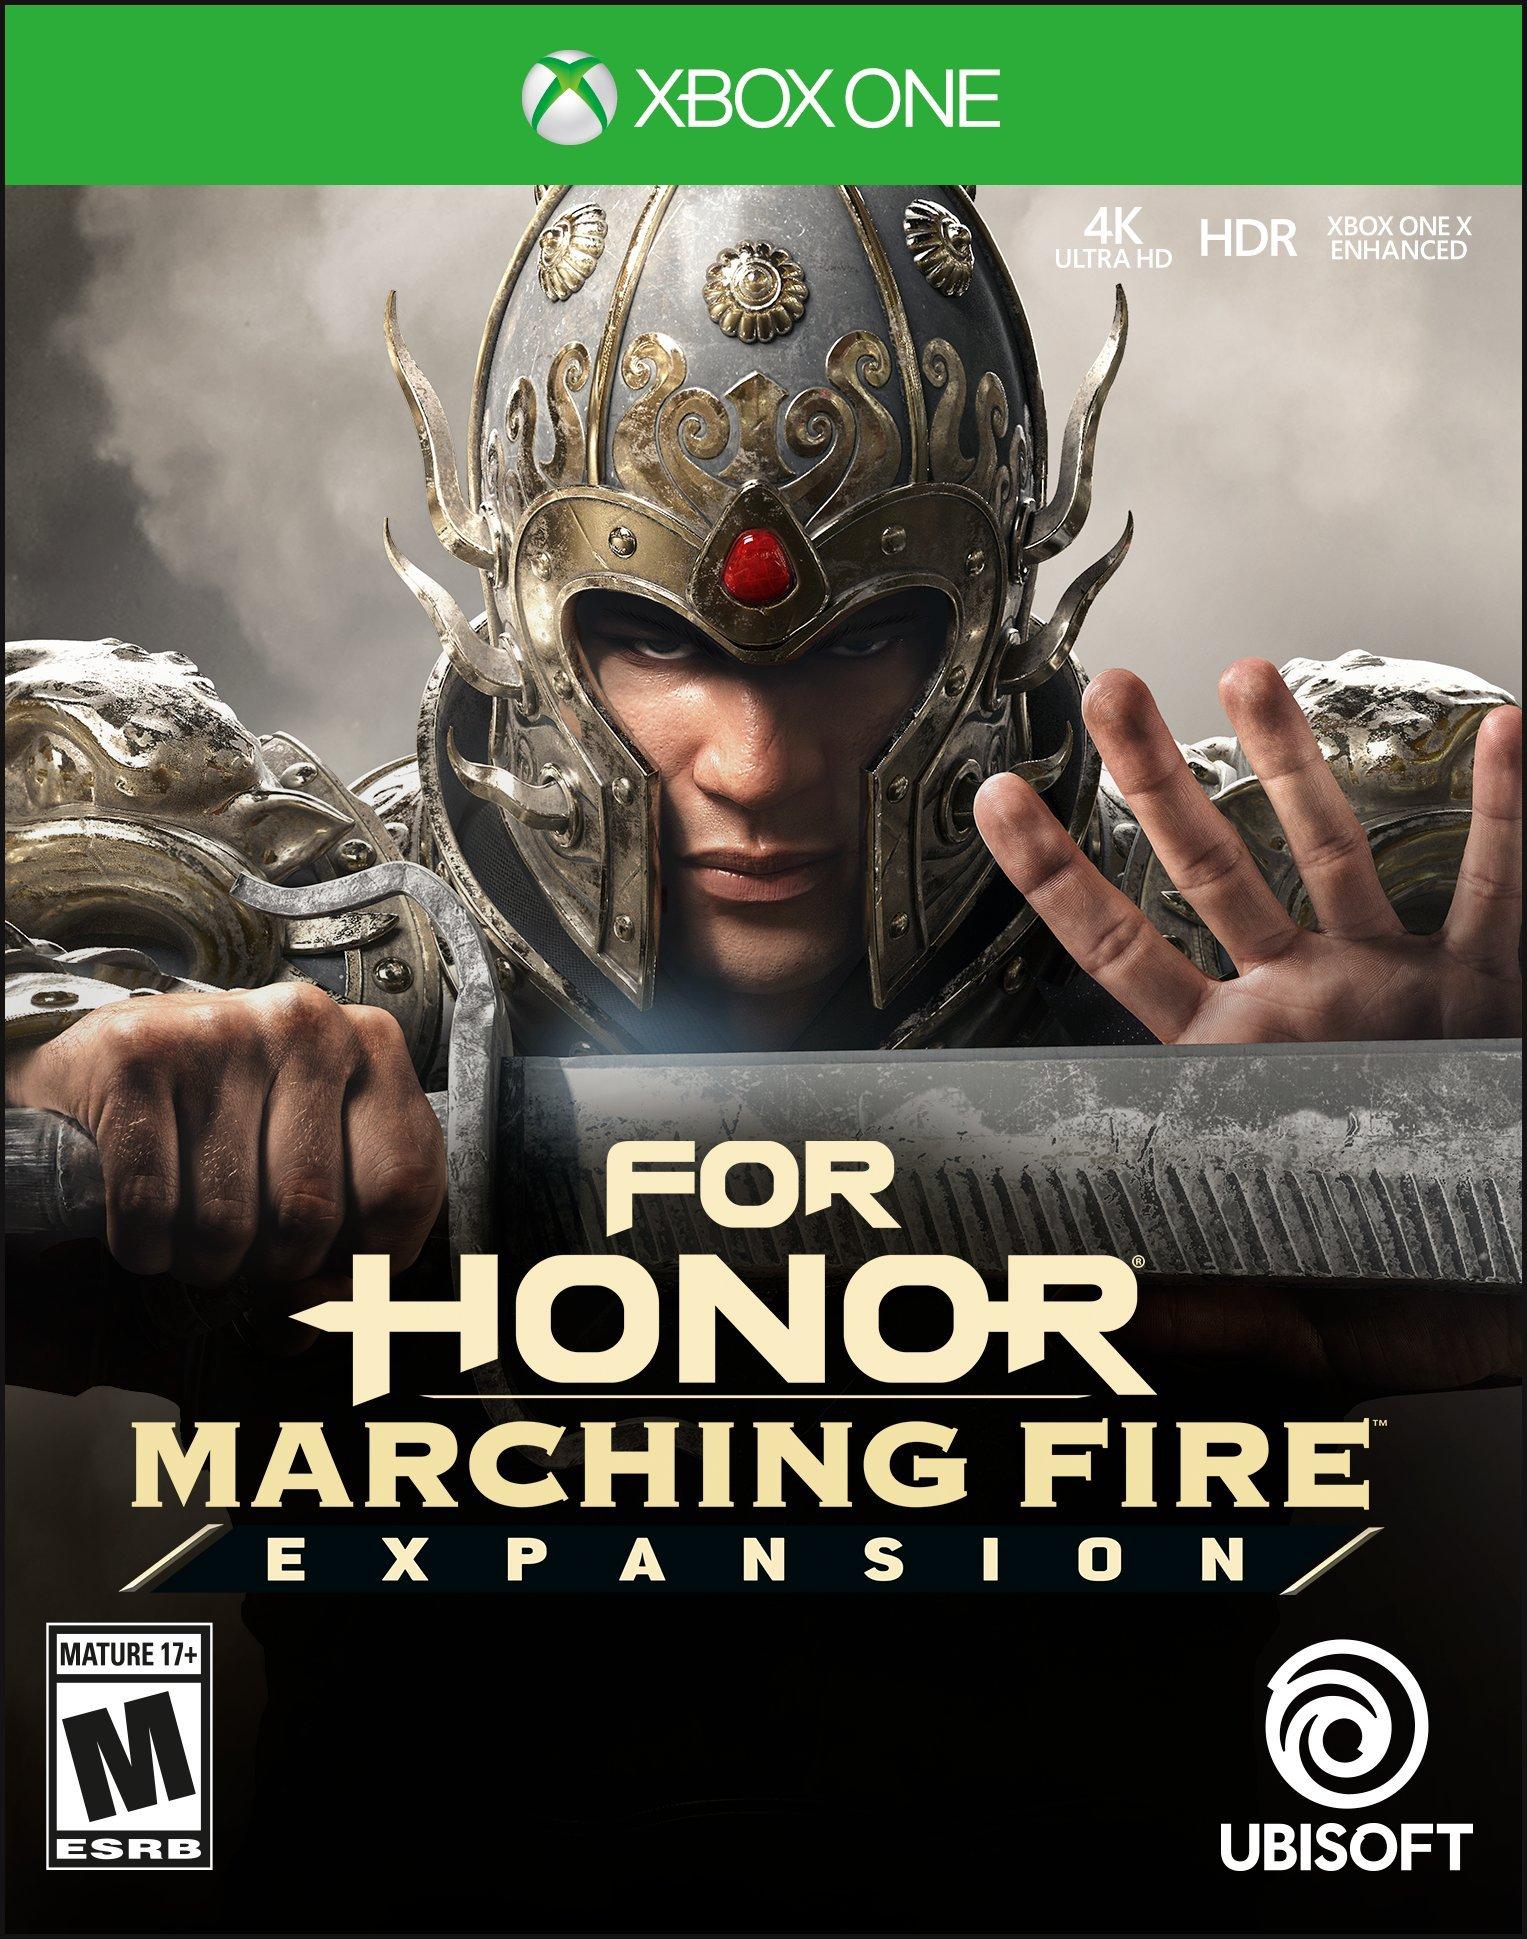 For Honor: Marching Fire Expansion DLC